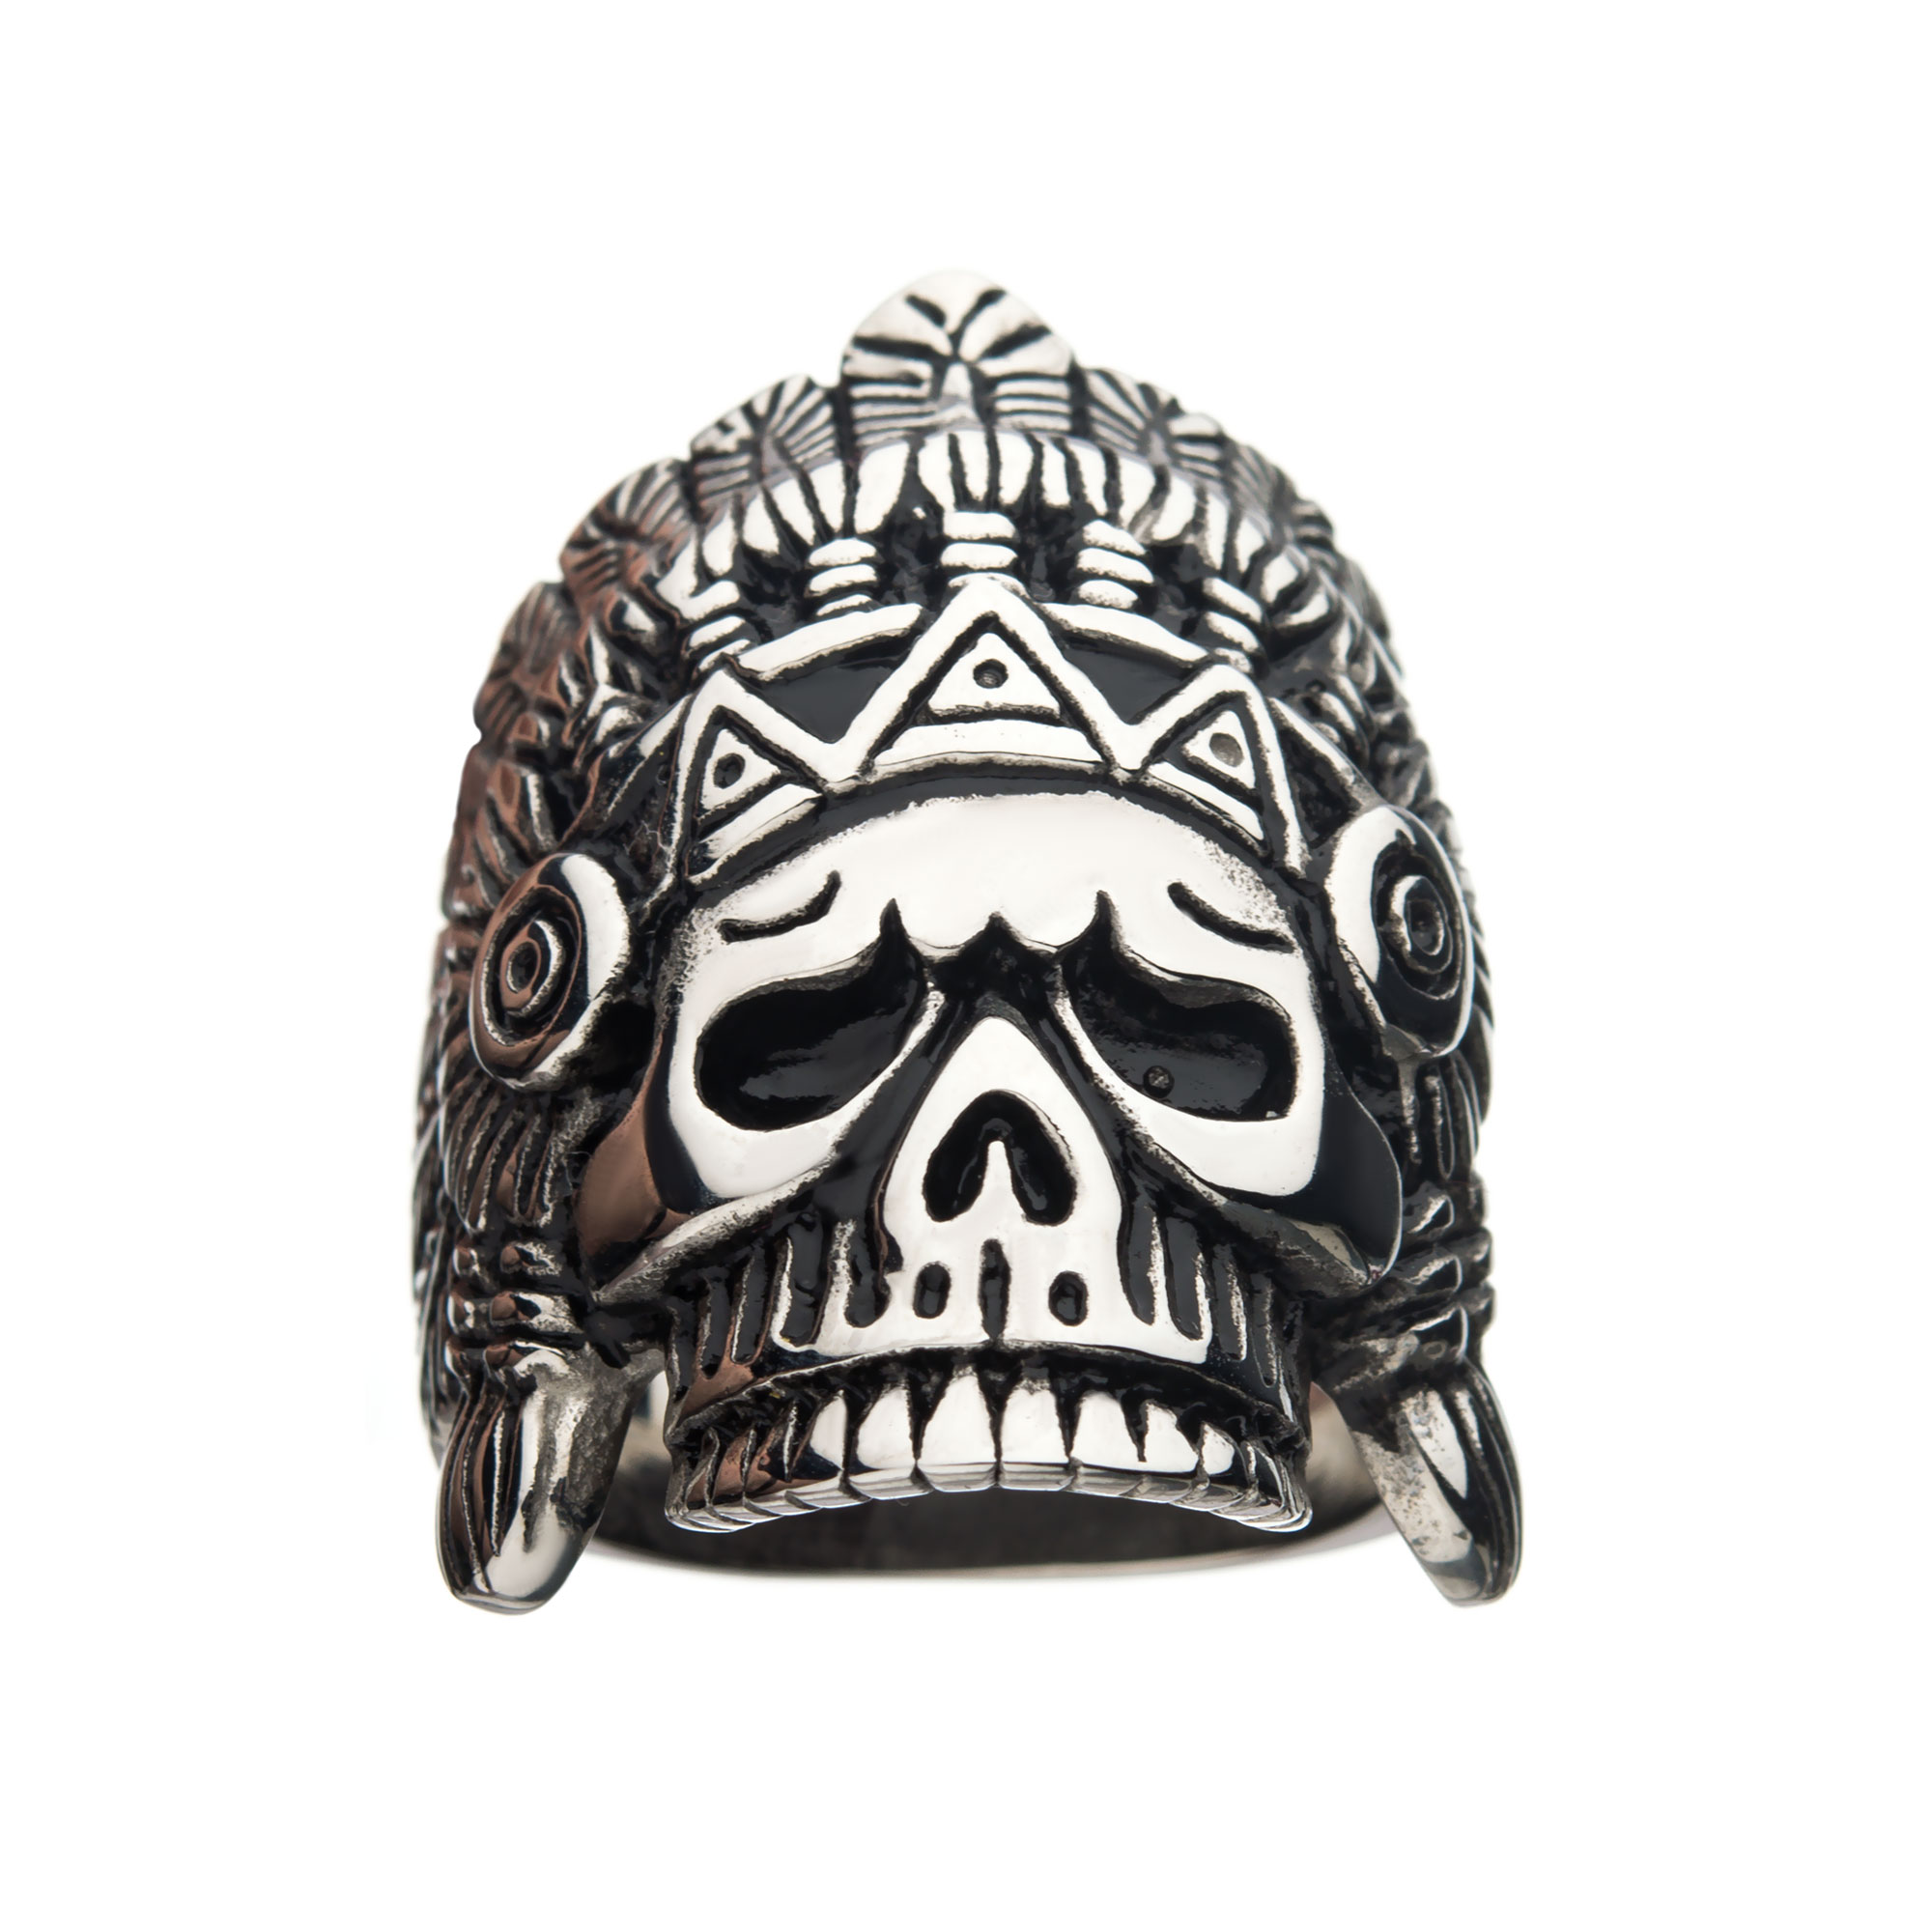 Oxidized Stainless Steel Chief Skull Ring Image 2 P.K. Bennett Jewelers Mundelein, IL